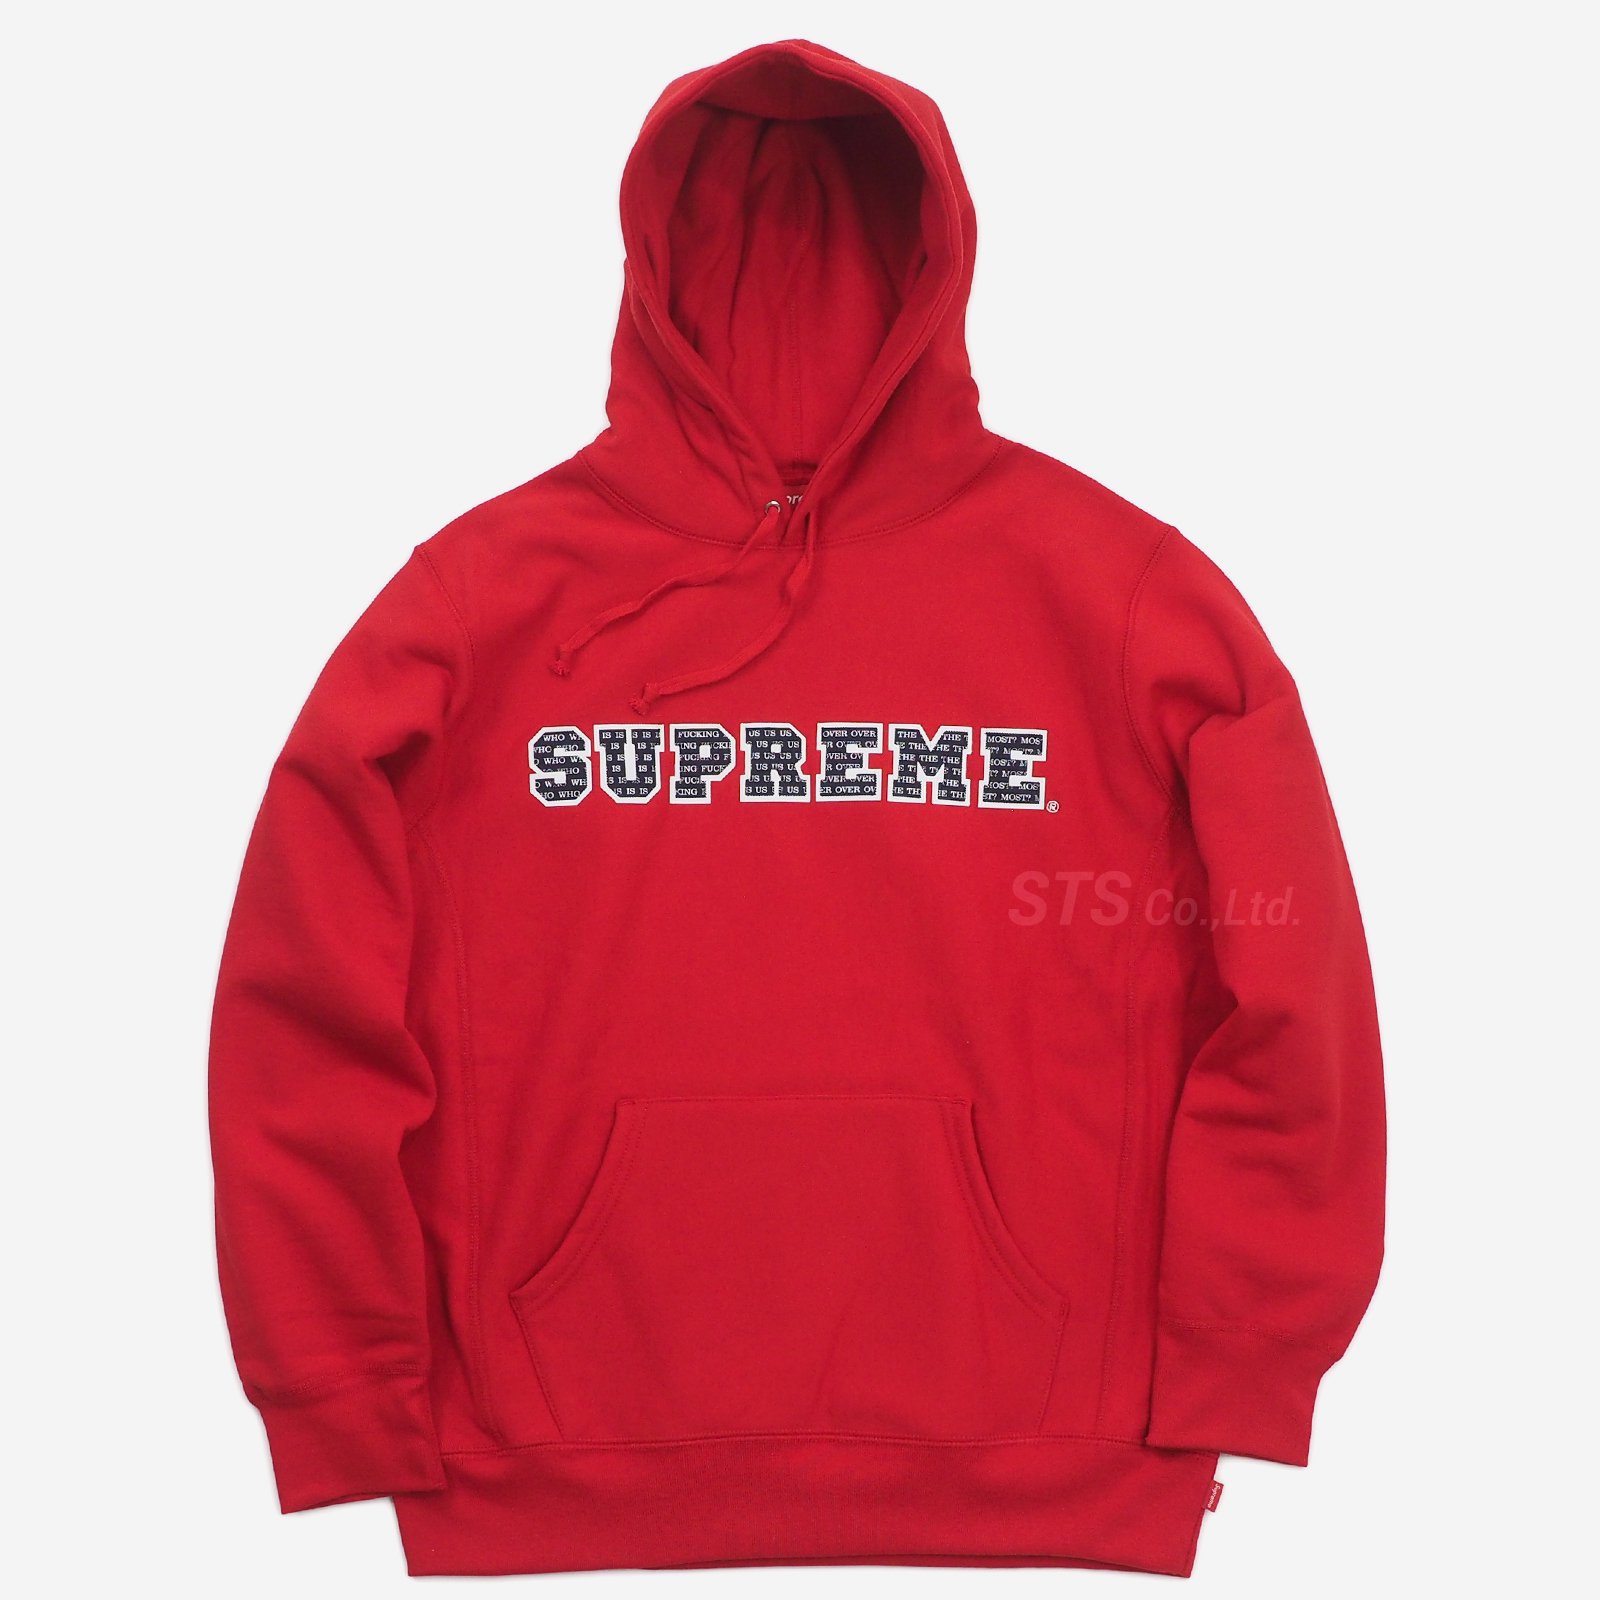 supreme the most hooded sweat shirt